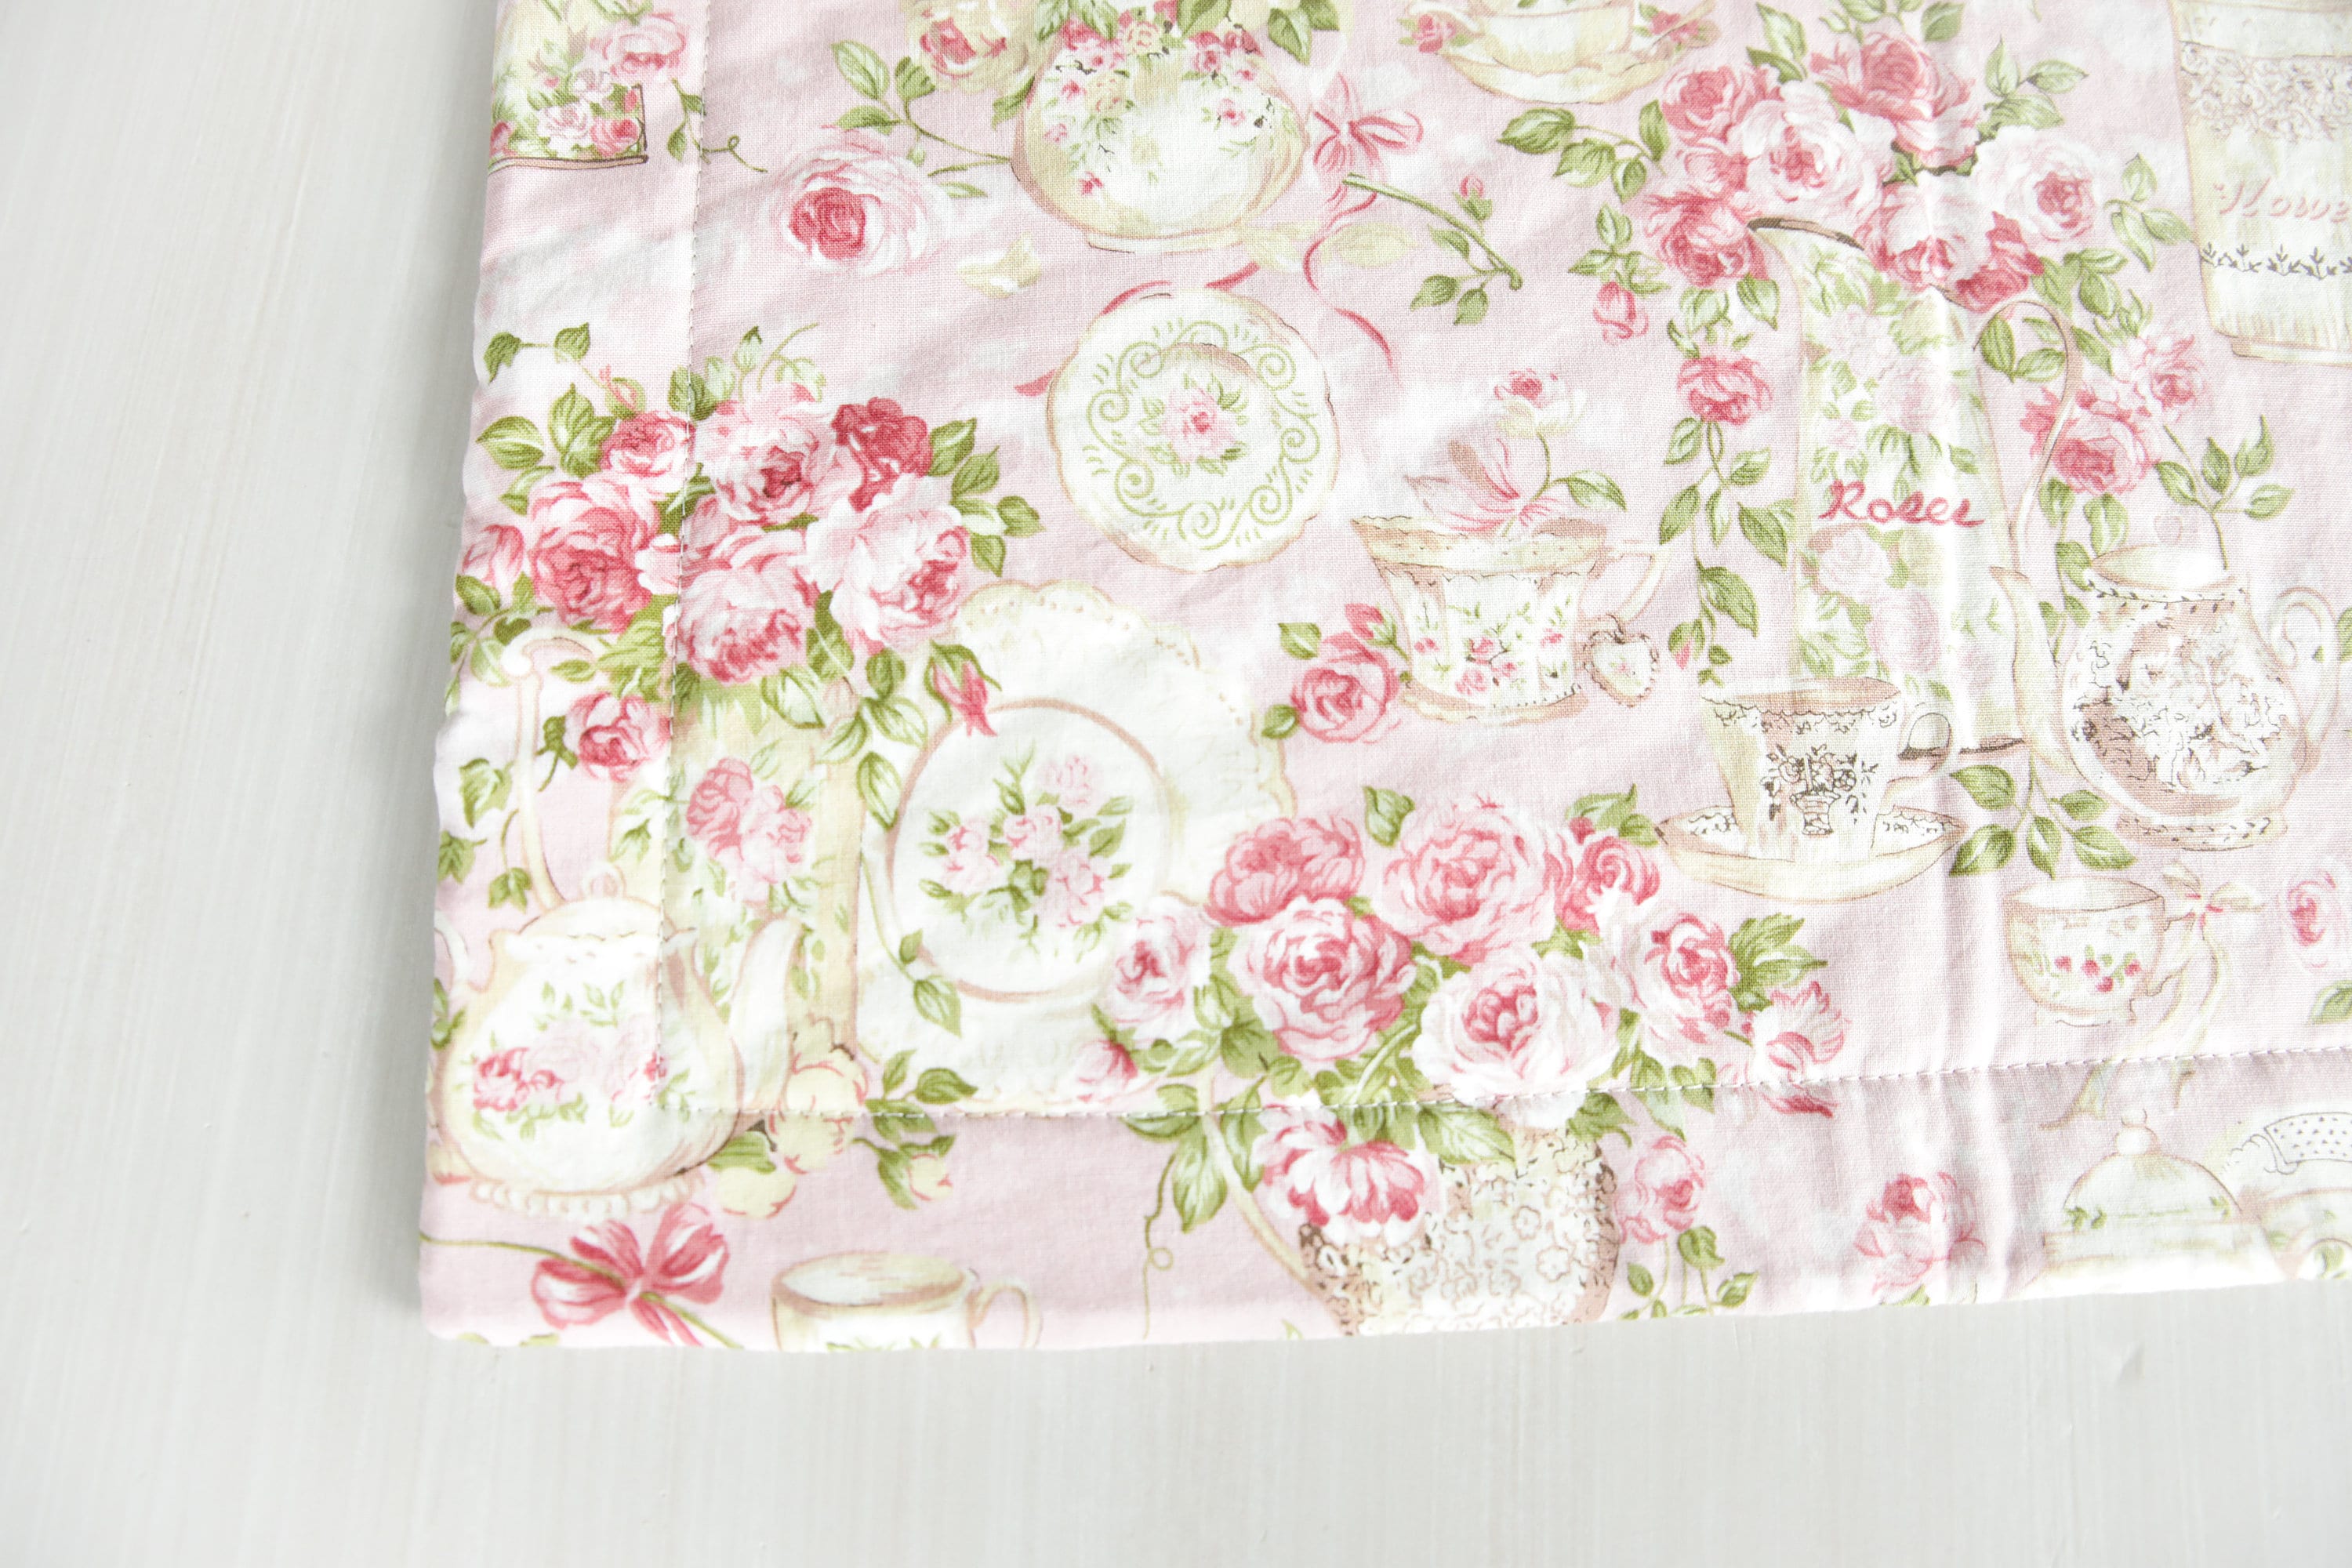 Pre-quilted roses, fabric by the yard, cotton quilted fabric, pink roses,  floral, pastel pink navy, happy baby girl, easy diy quilt